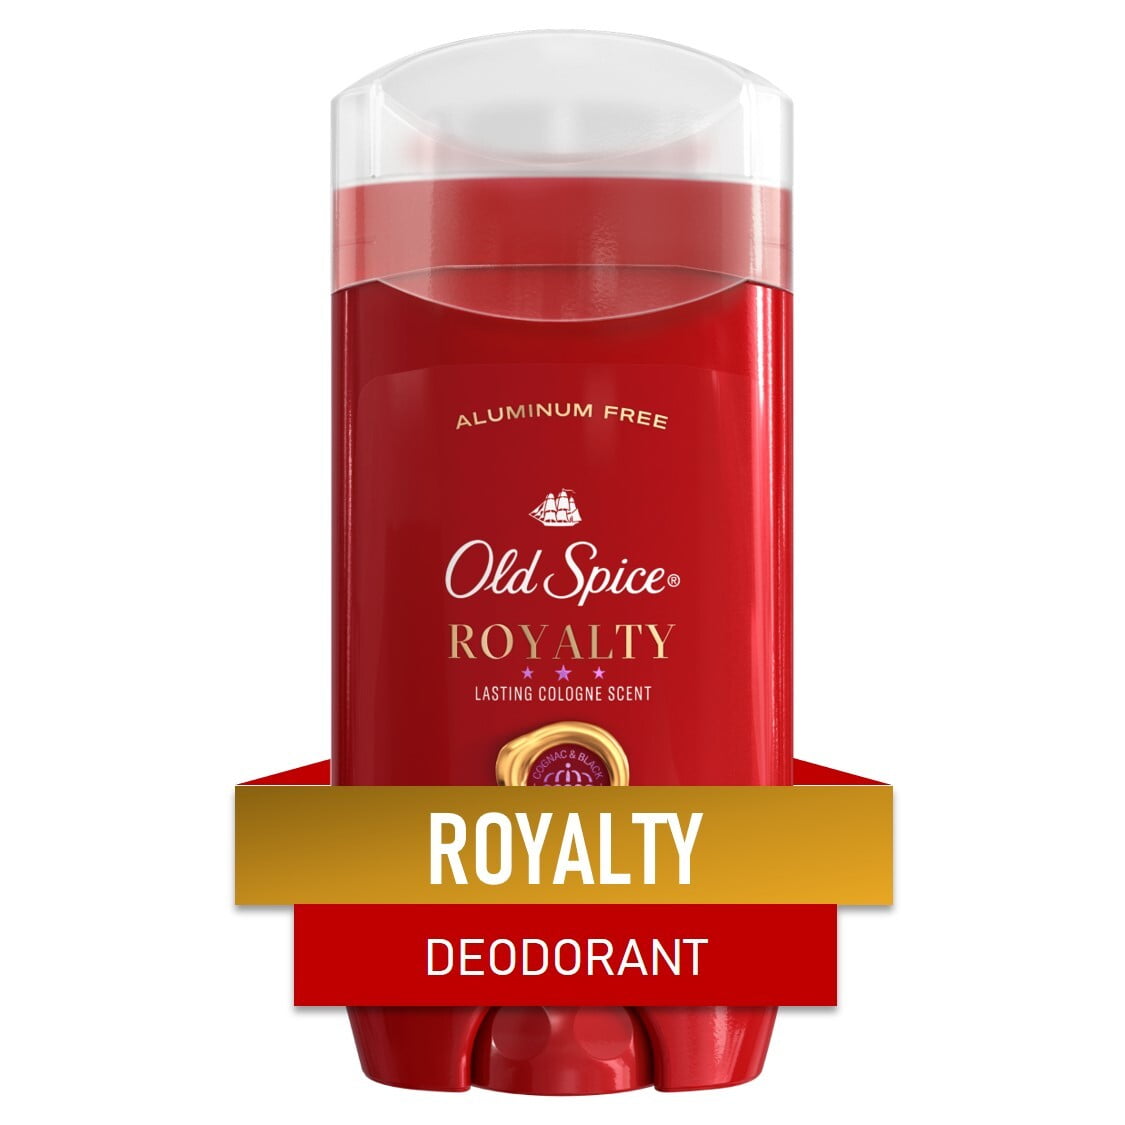 Old Spice Deodorant for Men, Aluminum Free, Royalty Cologne Scent, 3.0 oz